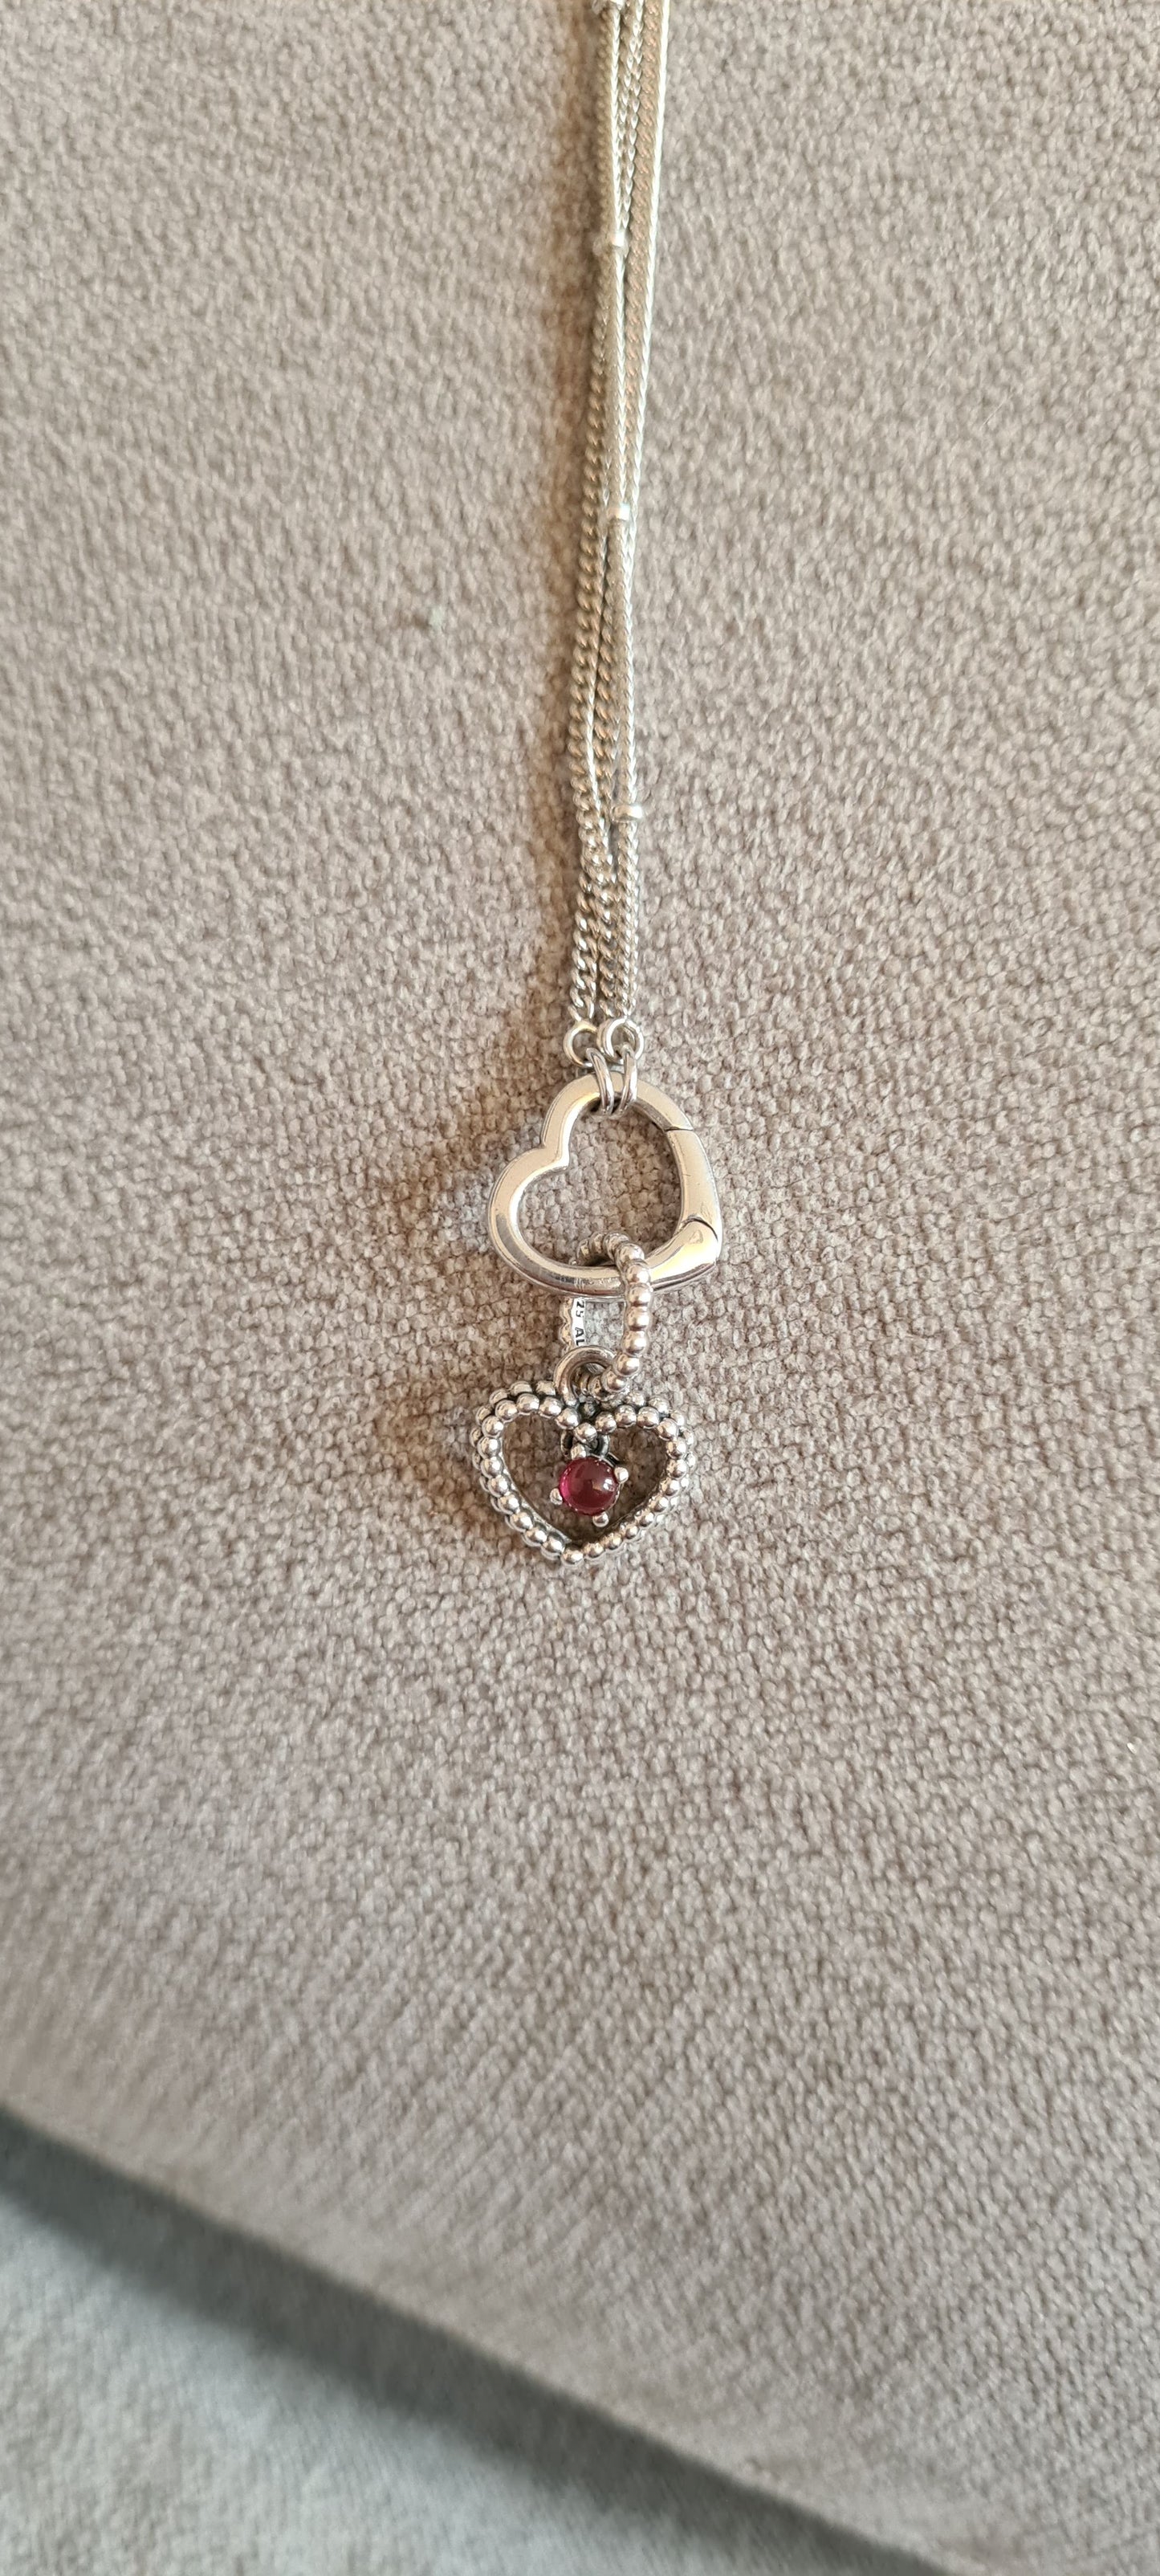 Genuine Pandora Heart Charm Carrying Necklace Unique Gift